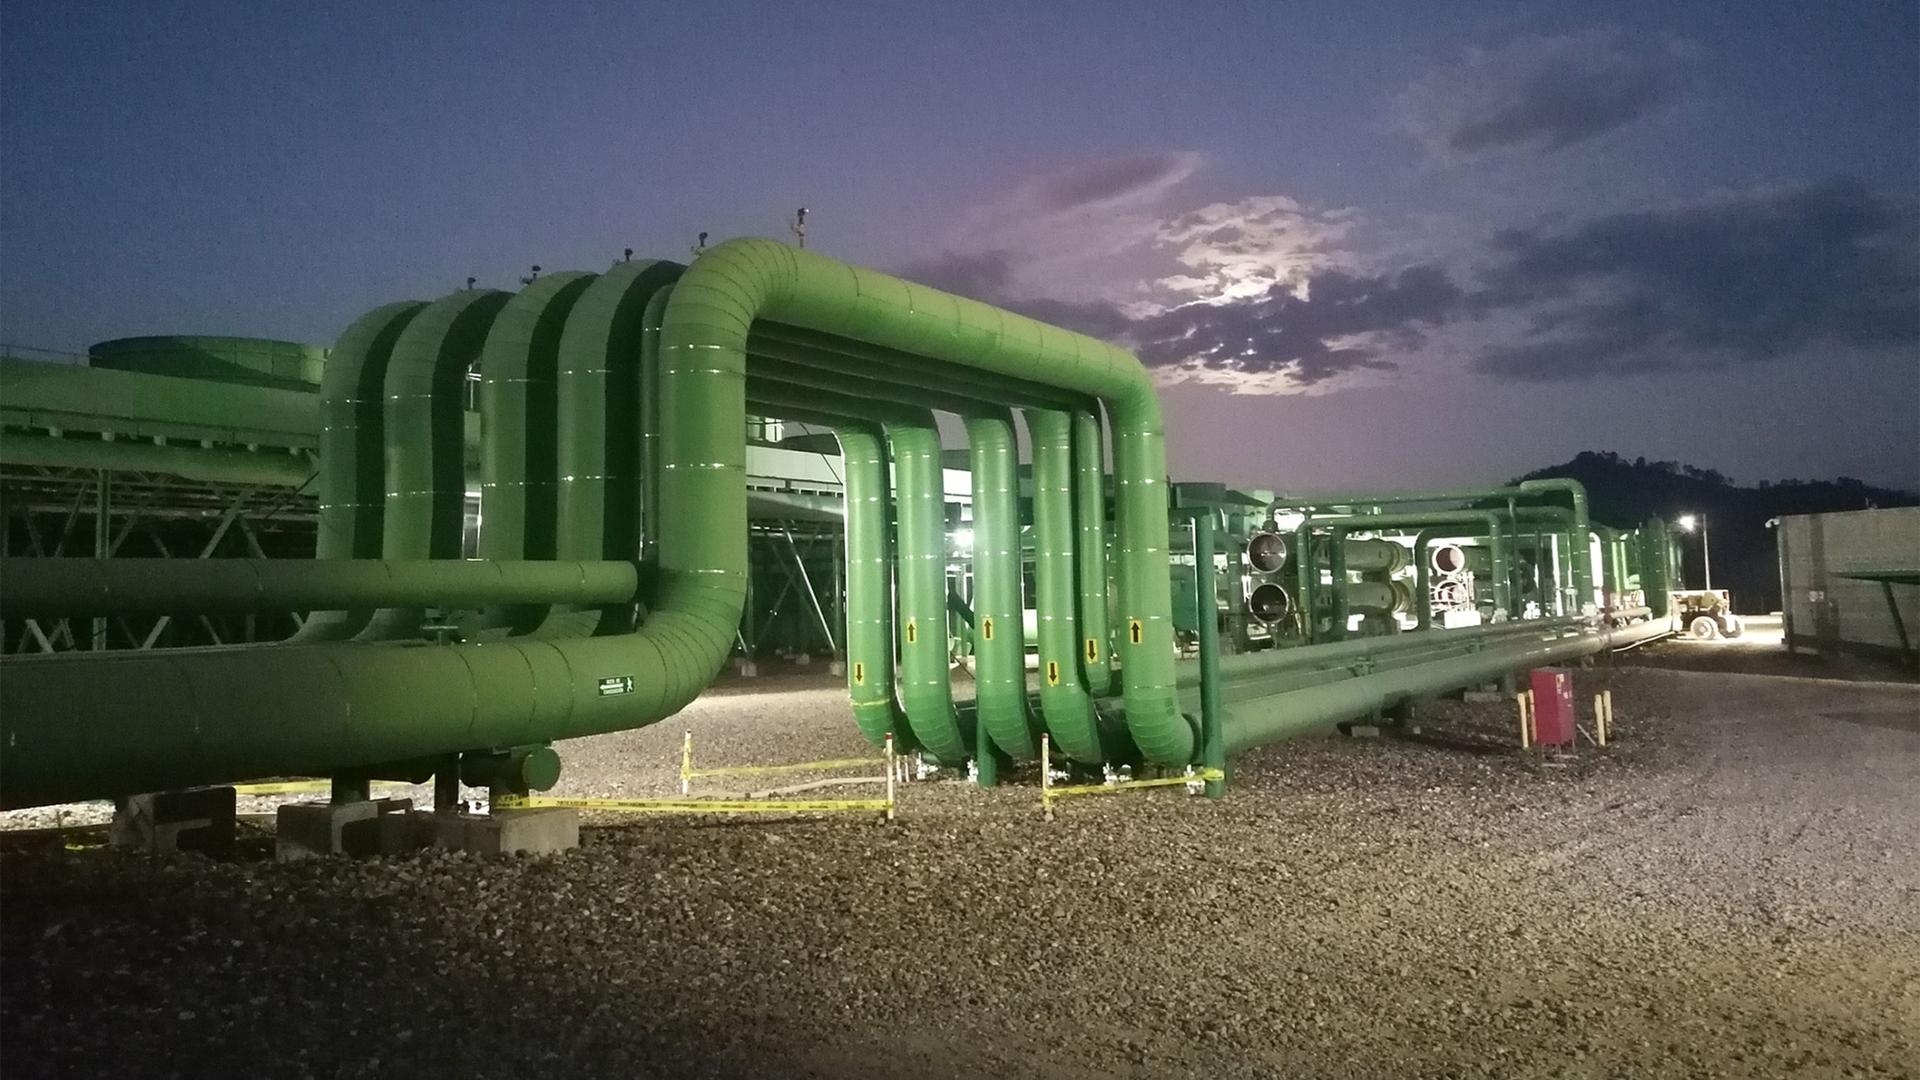 Huge green pipes on sandy ground against a dark blue sky